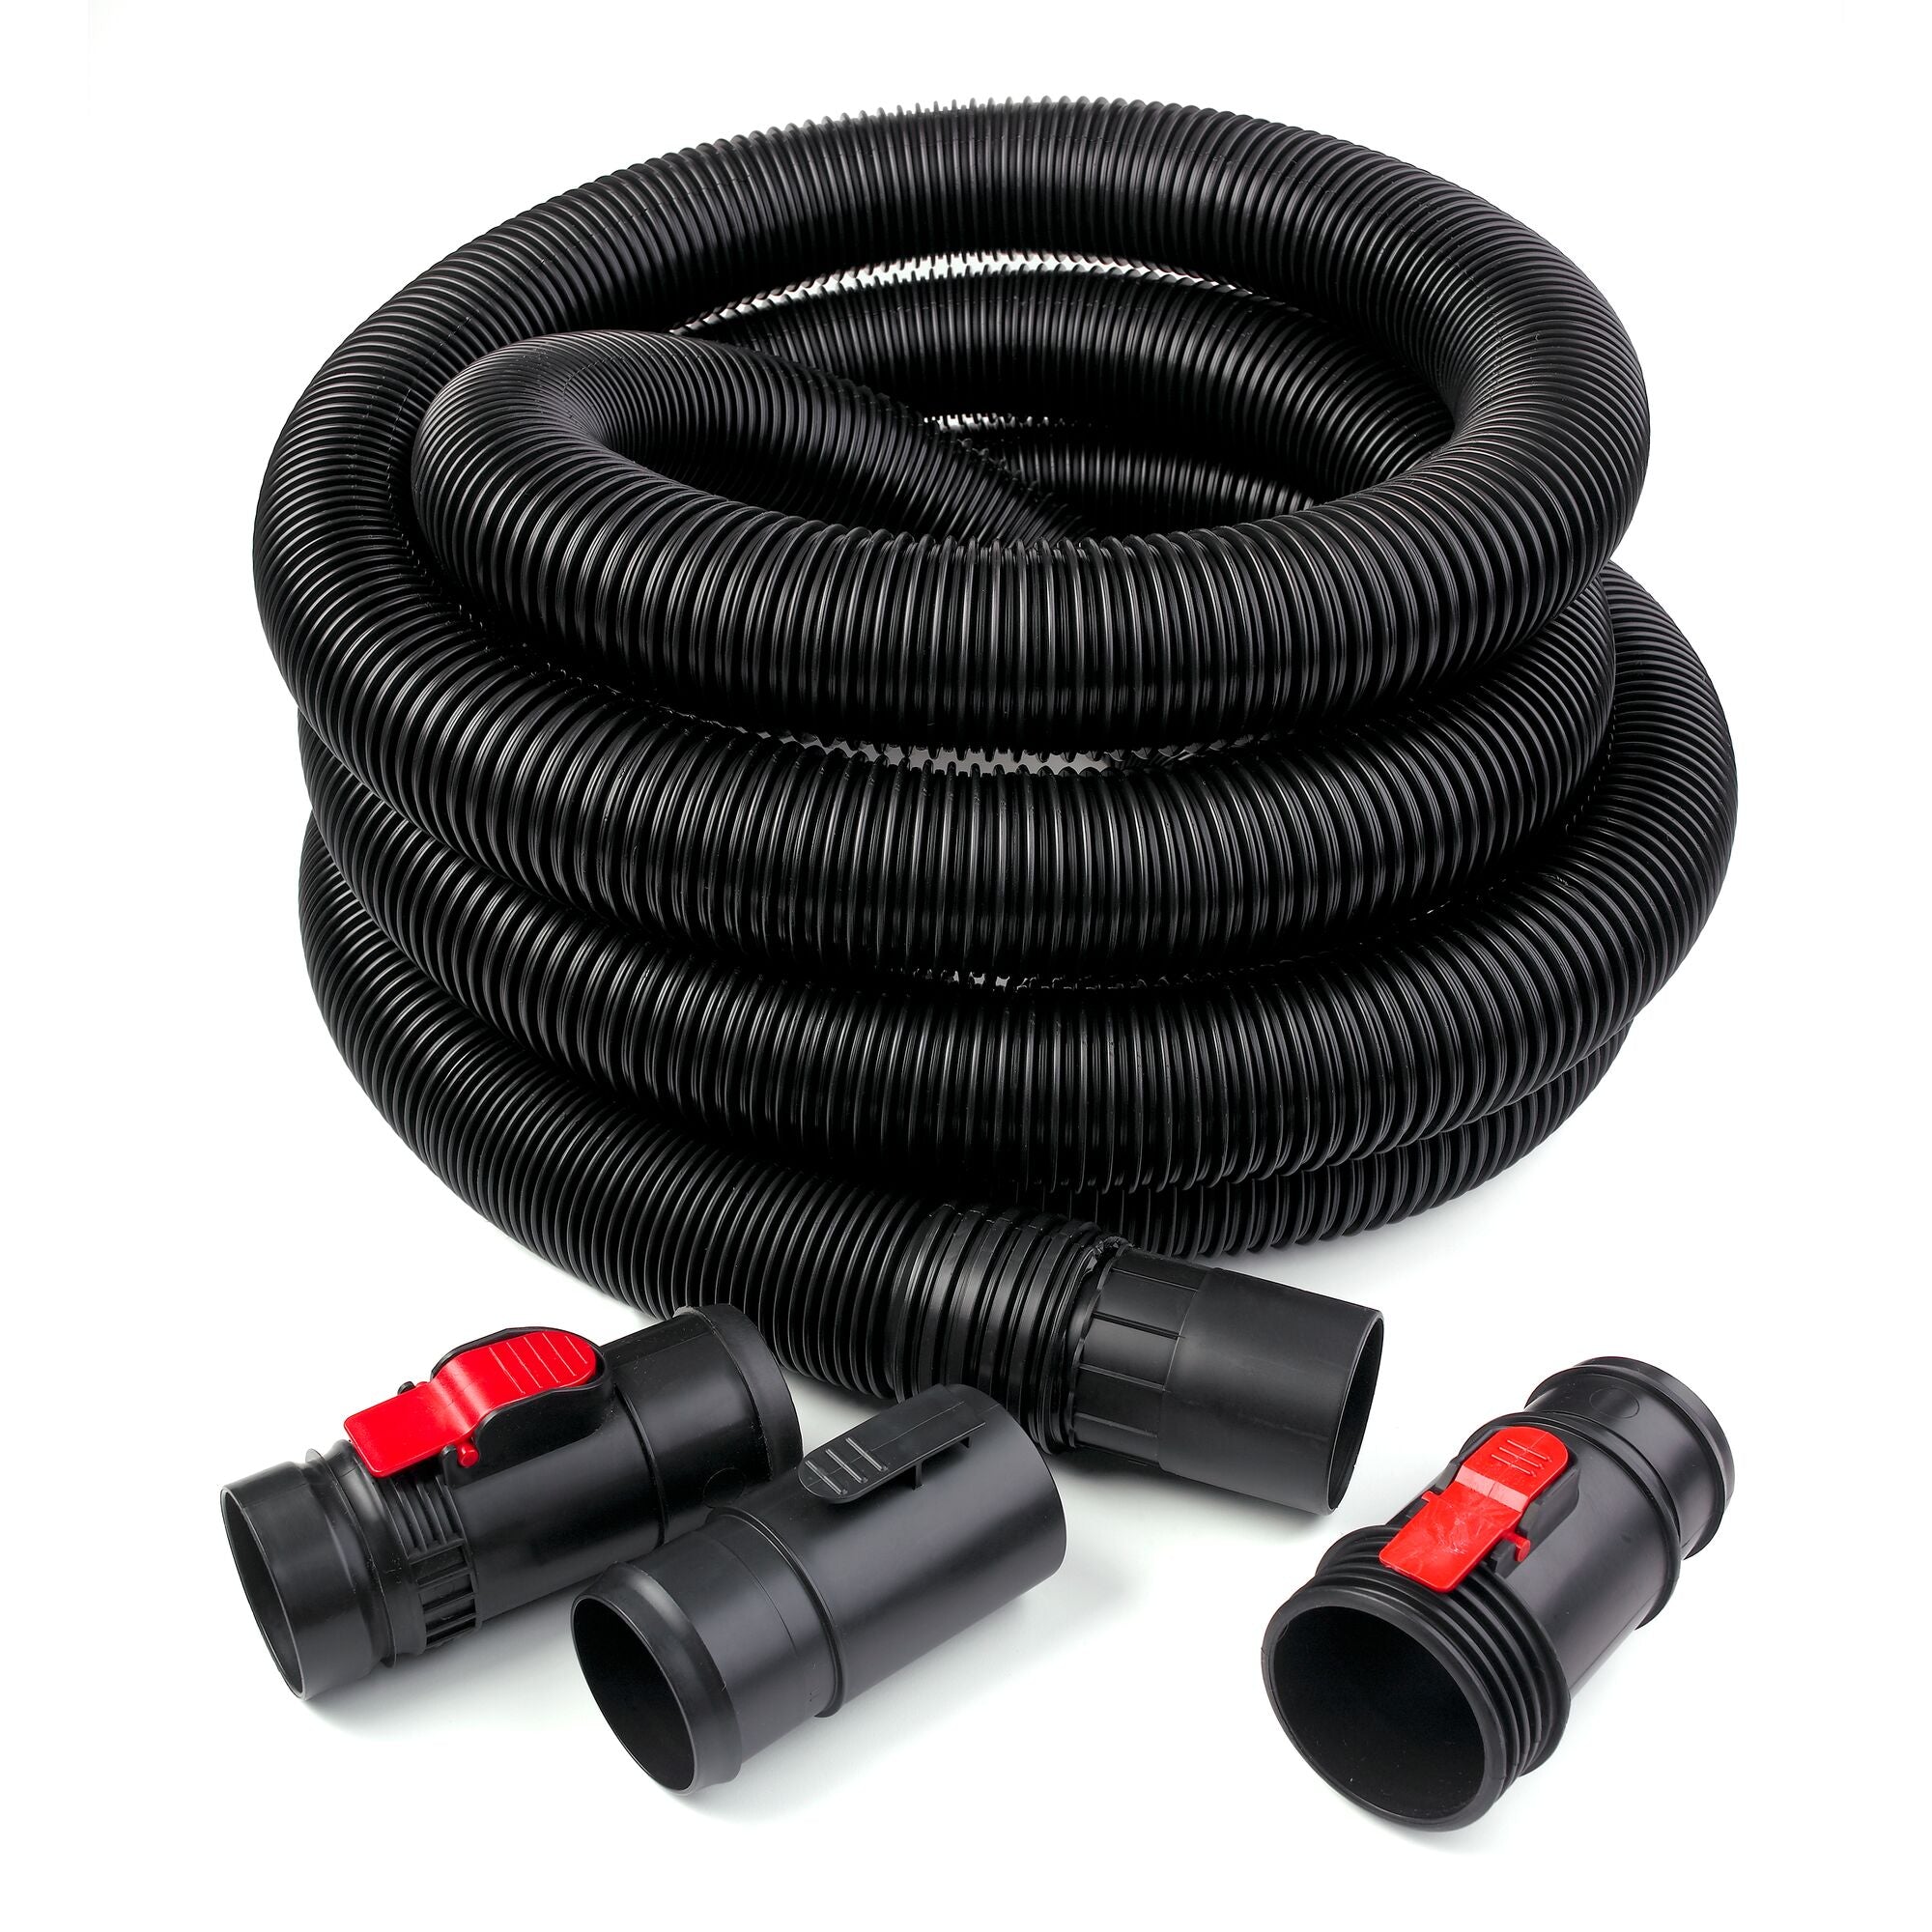 Front view of coiled-up 2-1/2 inch diameter by 20-foot length locking hose accessory with 3 adapters